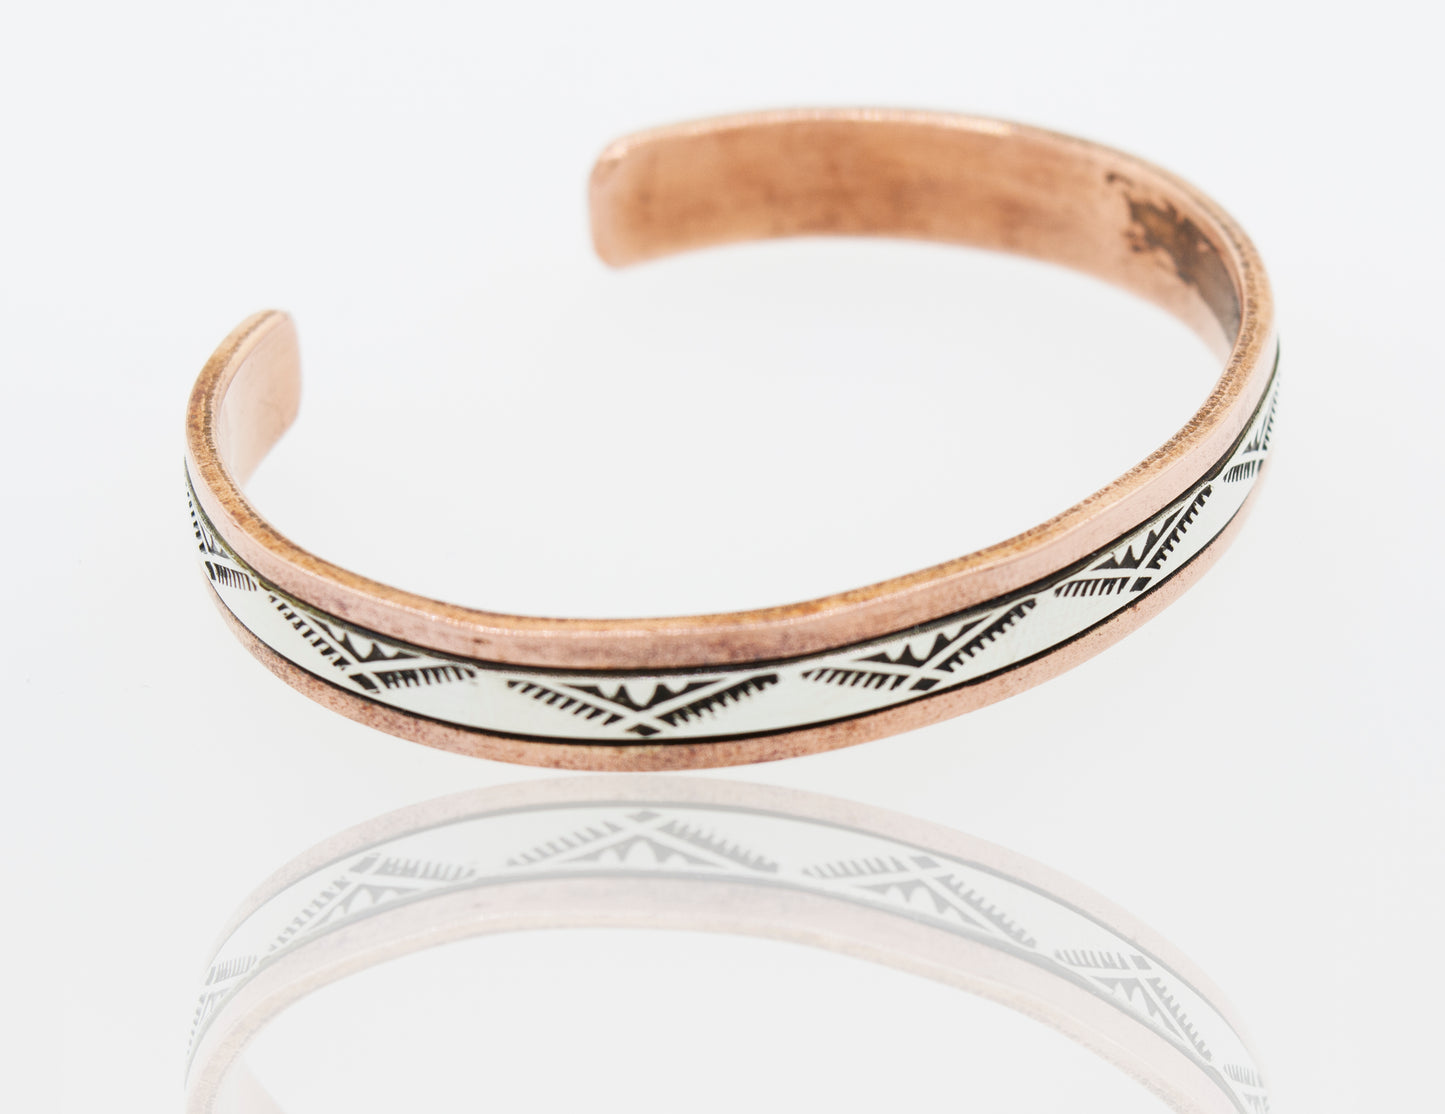 A handcrafted Super Silver Native American copper and silver cuff bracelet adorned with white and black designs.